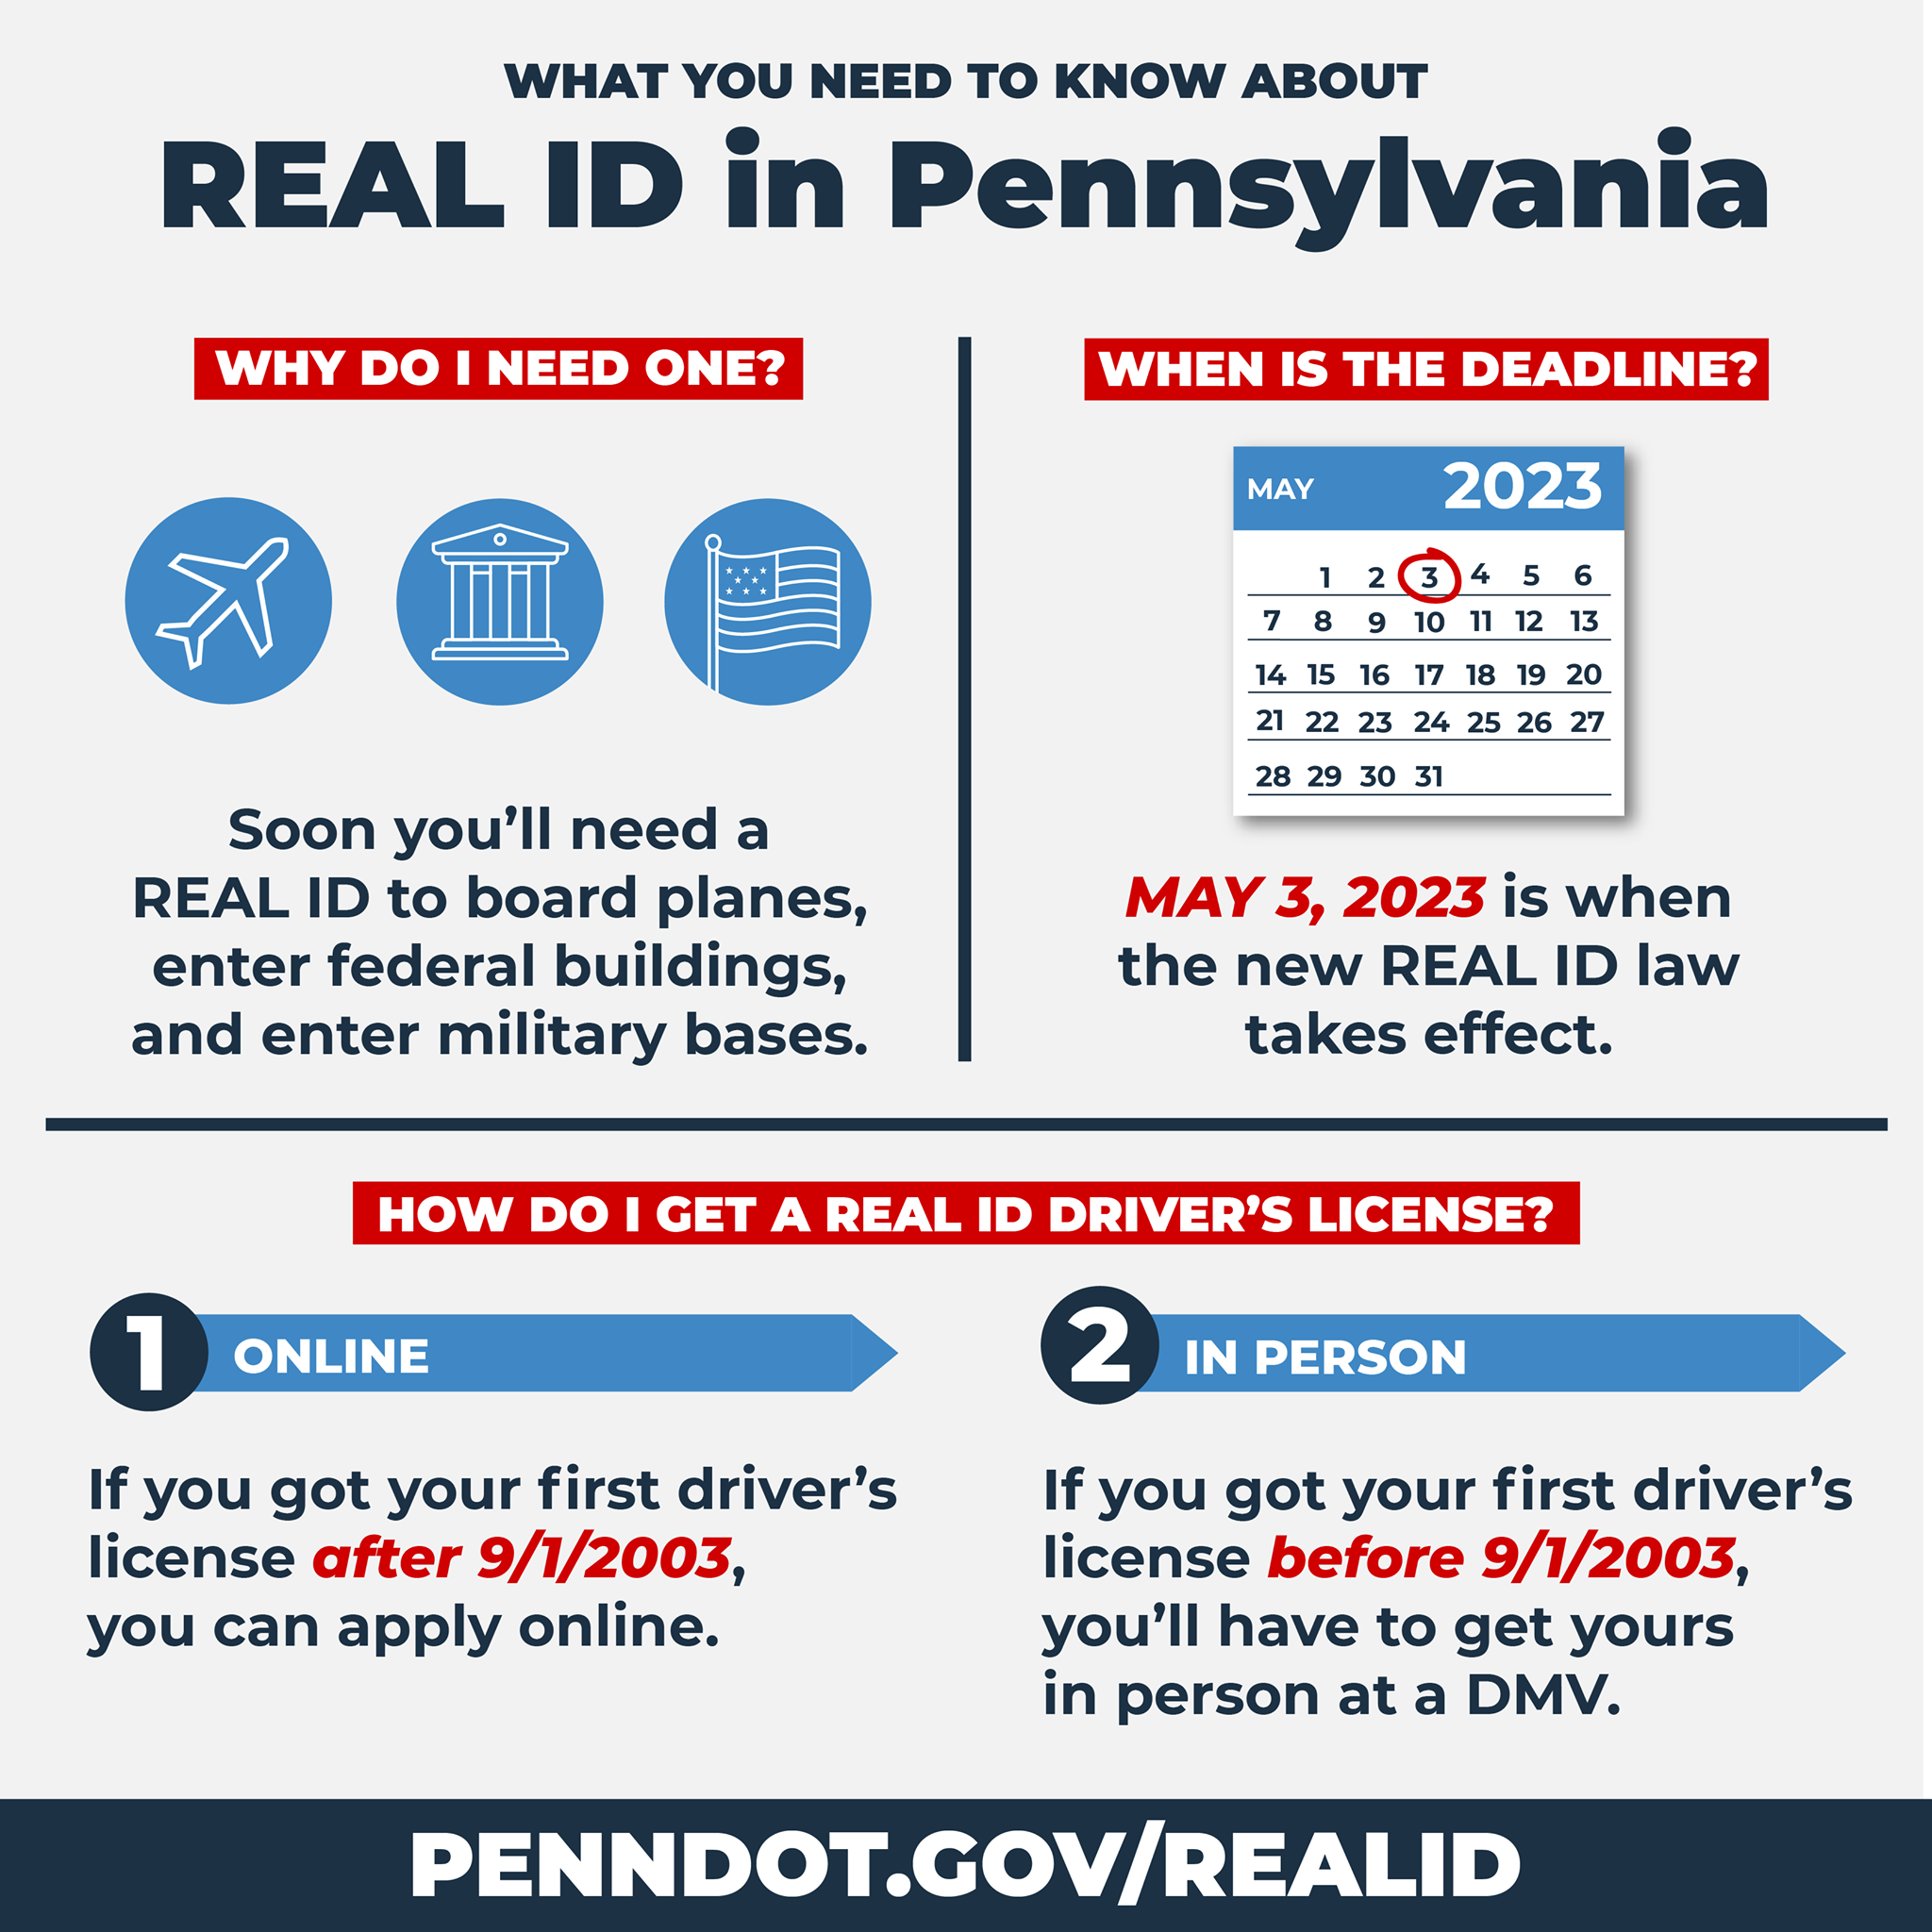 Real Id Deadline Changed To May 3 2023 Erie News Now Wicu And Wsee